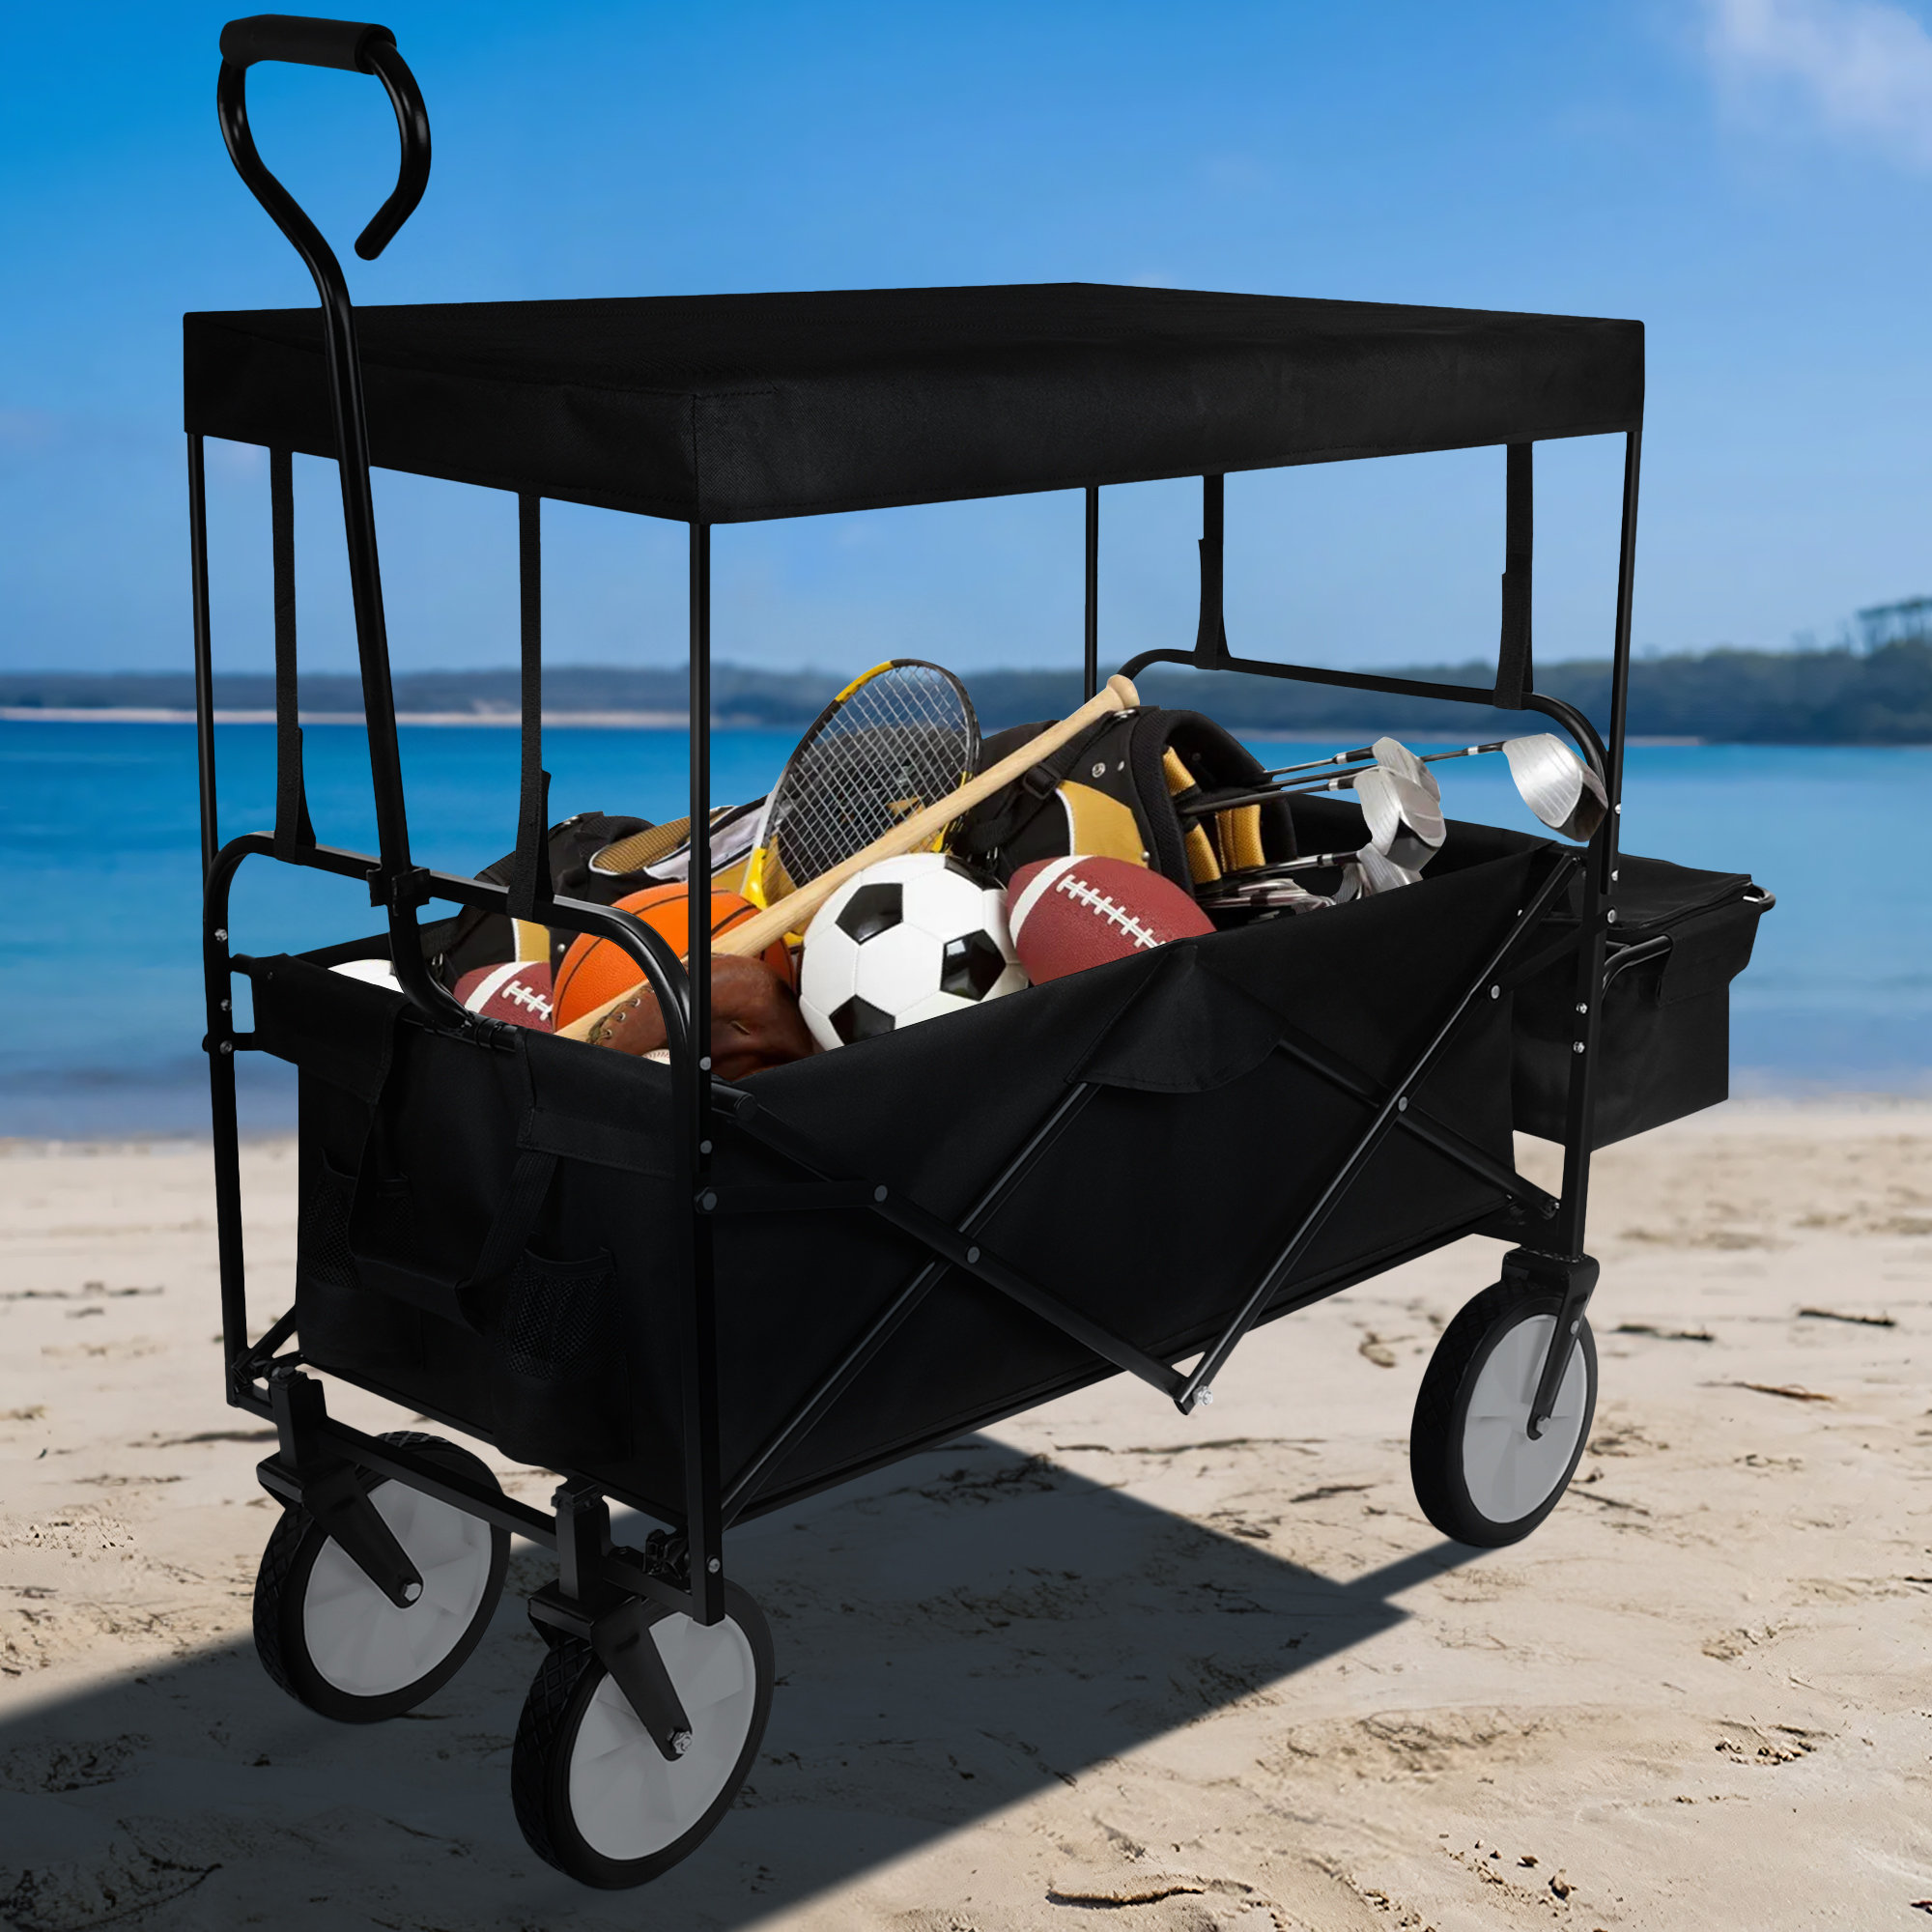 EASYWAY Garden Cart 220lbs Capacity Heavy-Duty Portable Collapsible Utility  Wagon with Removable Canopy  Reviews Wayfair